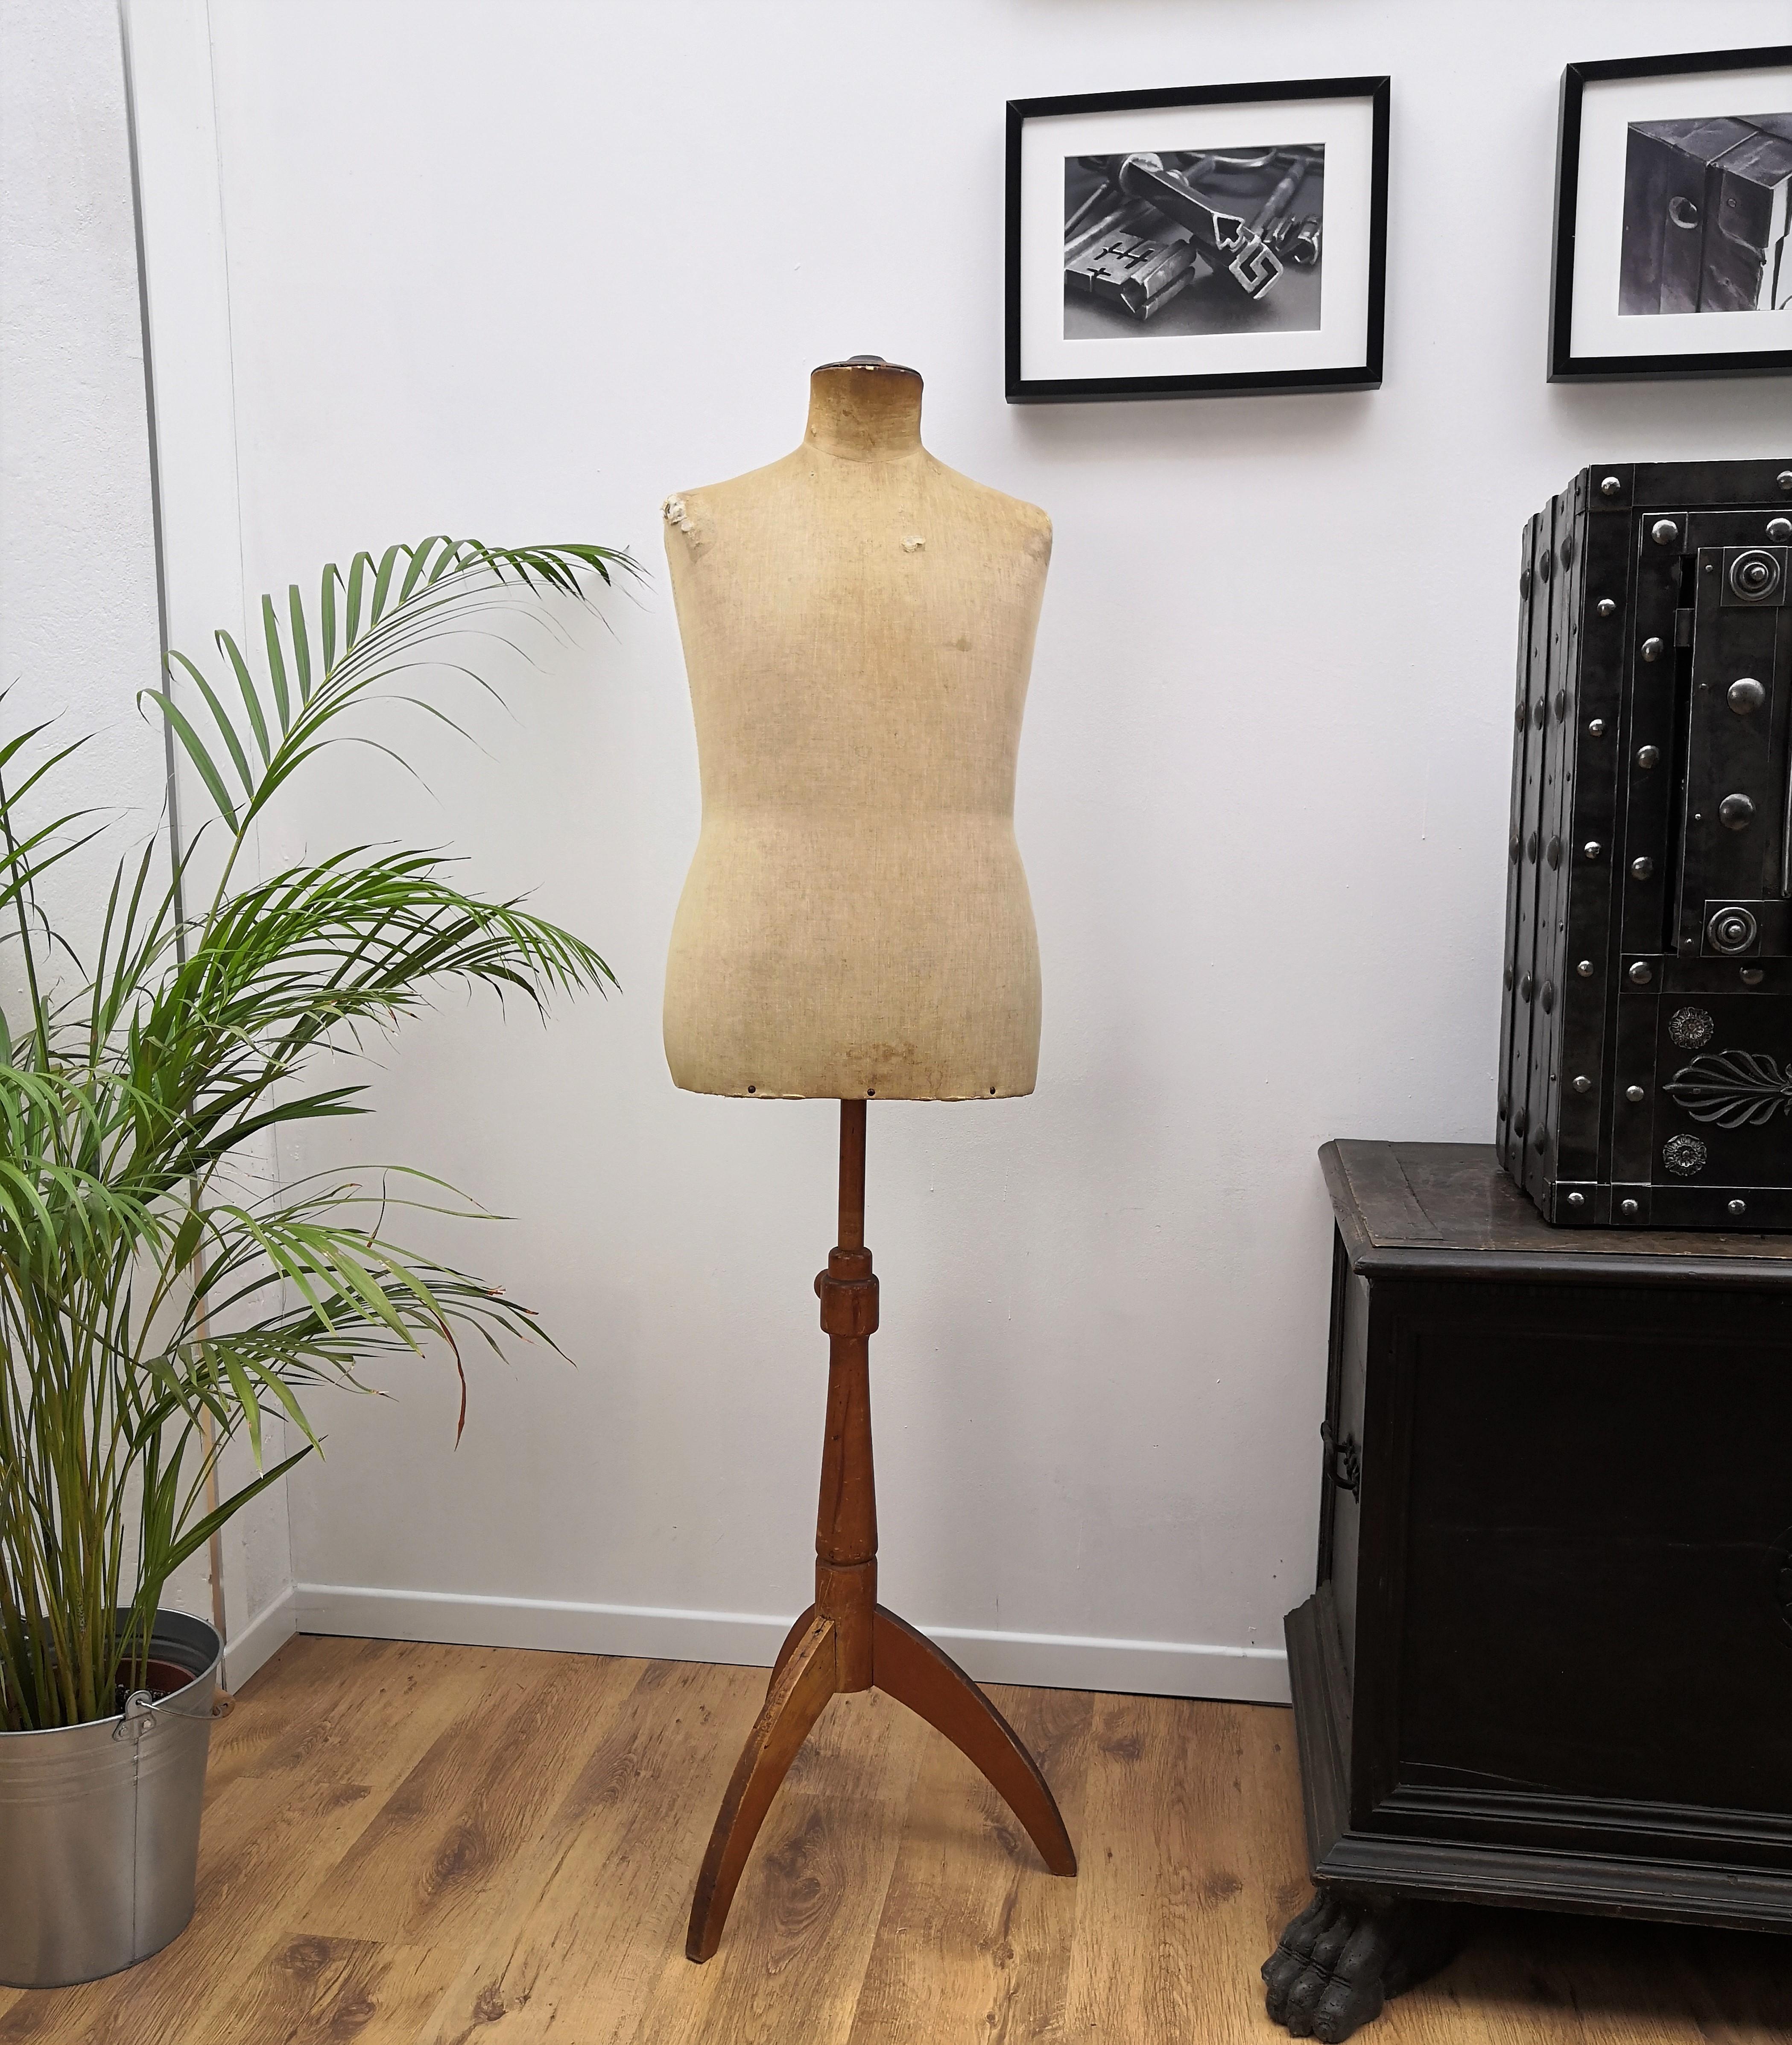 This Mannequin or dressmaker and tailor's dummy, stands on a tripod base in light oak wood and has leather detail in the neck/head. The dressmaker bust dates from around mid-1900, is in original conditions with great patina and feeling of past